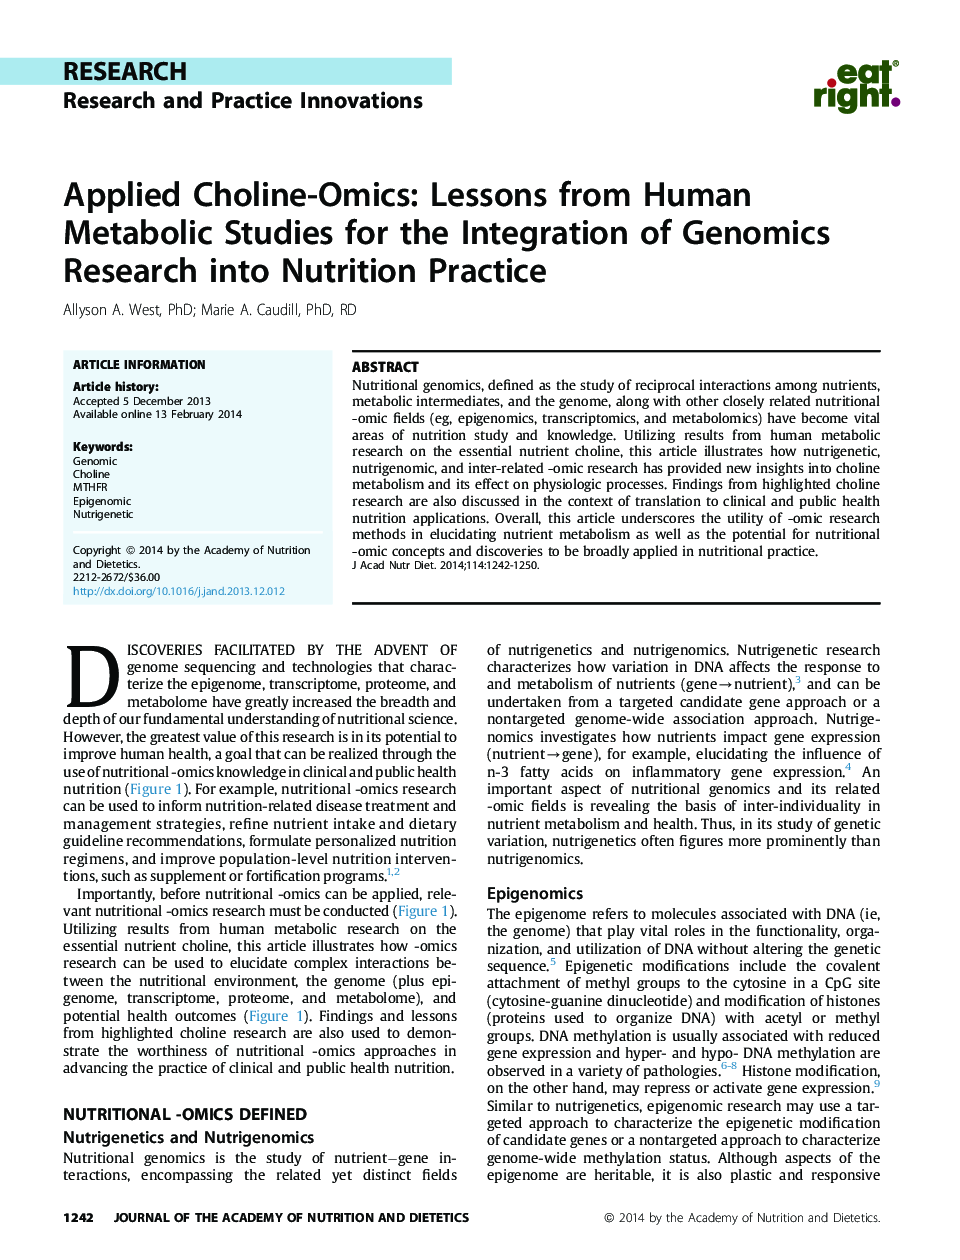 Applied Choline-Omics: Lessons from Human Metabolic Studies for the Integration of Genomics Research into Nutrition Practice 